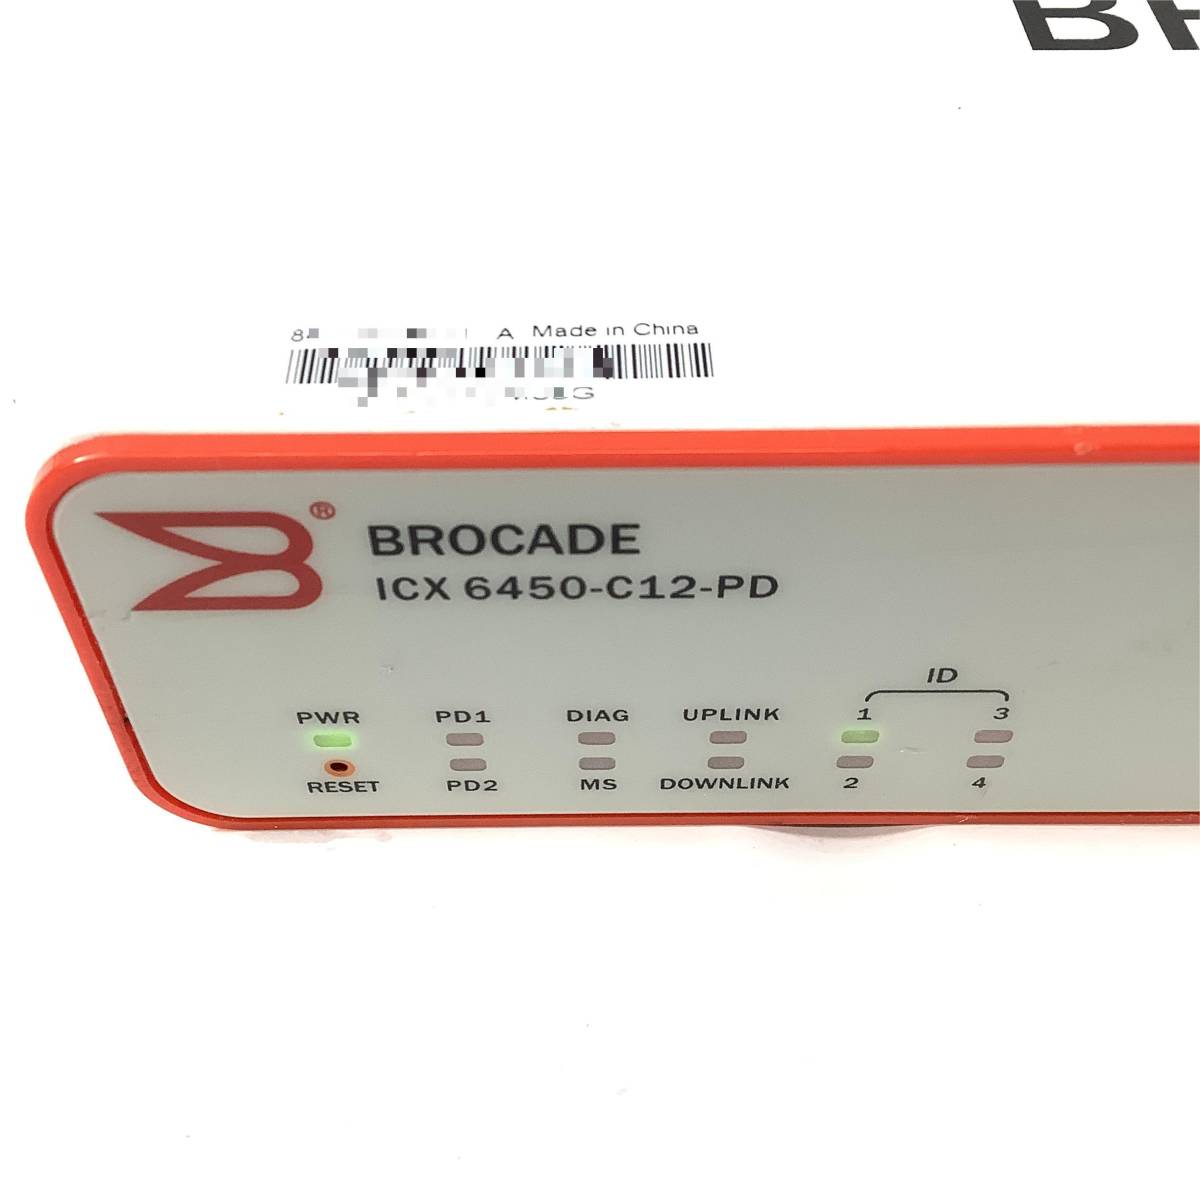 S6011560 Brocade ICX 6450-C12-PD Switch 1 point [ electrification OK,AC lack of ]